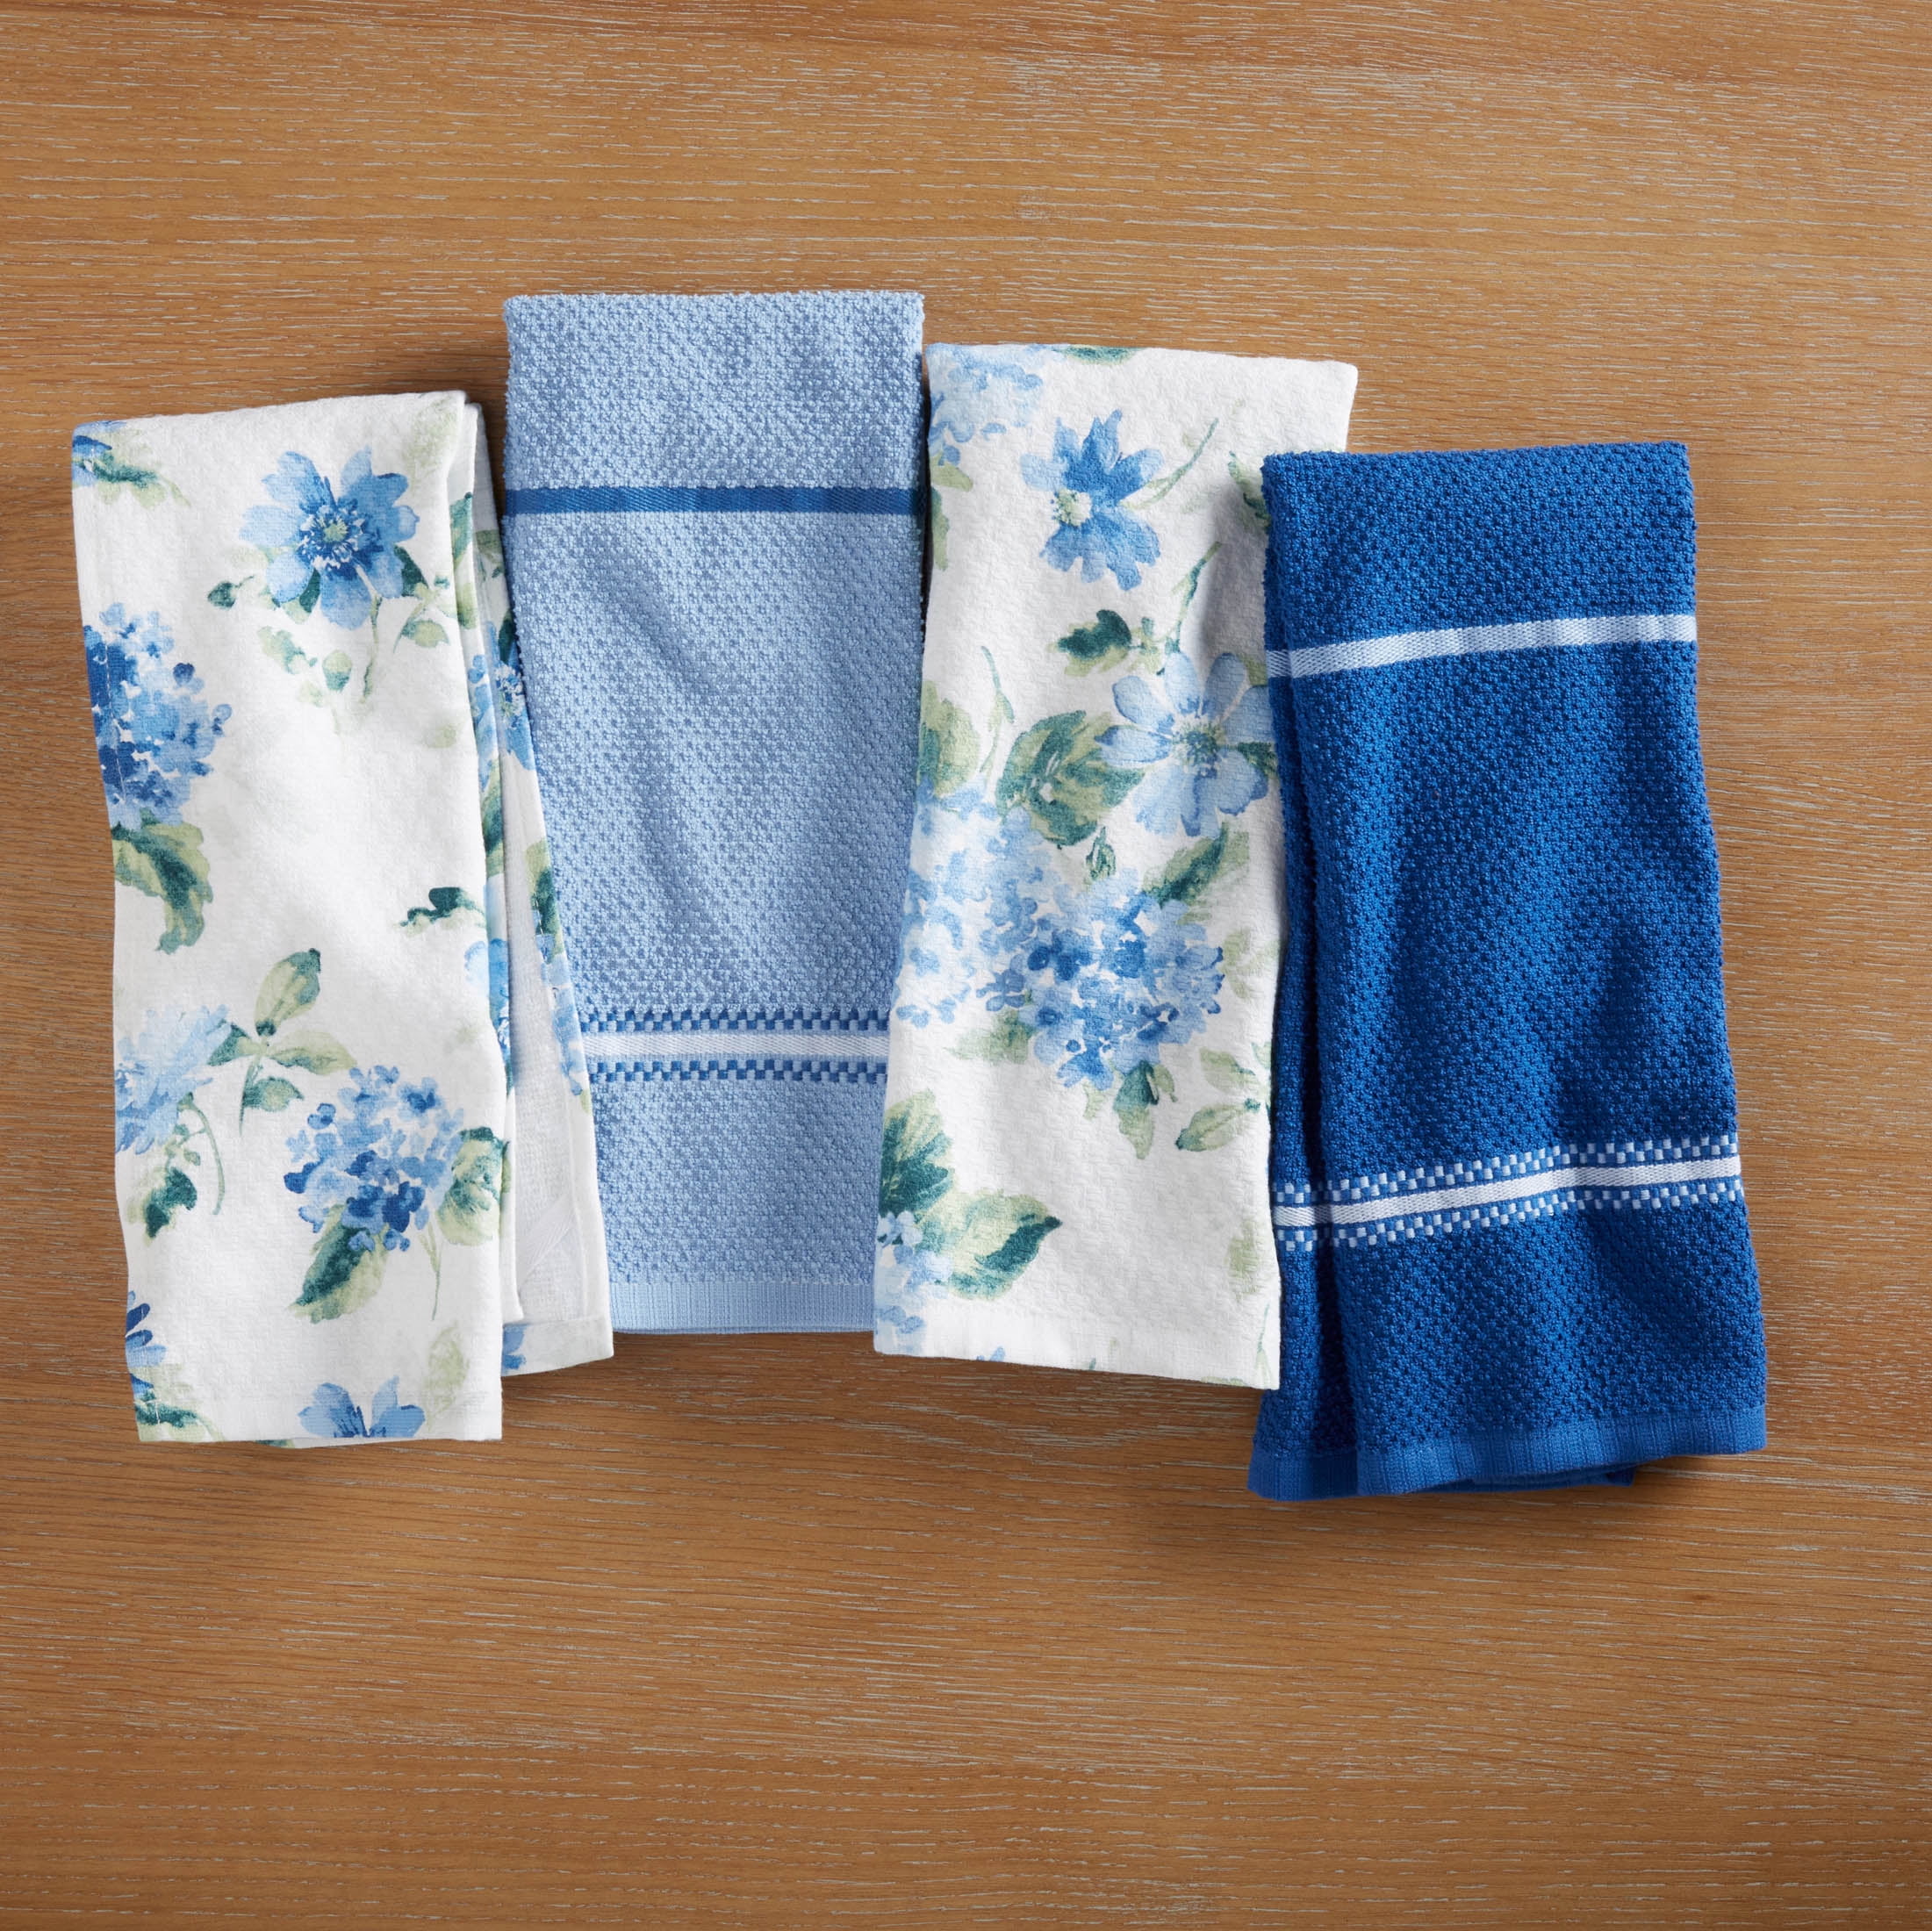 2 New packs of 8 Martha Stewart kitchen towels with anti-microbial  protection. 2 times the money. Total price is quantity times bid price. -  Rocky Mountain Estate Brokers Inc.